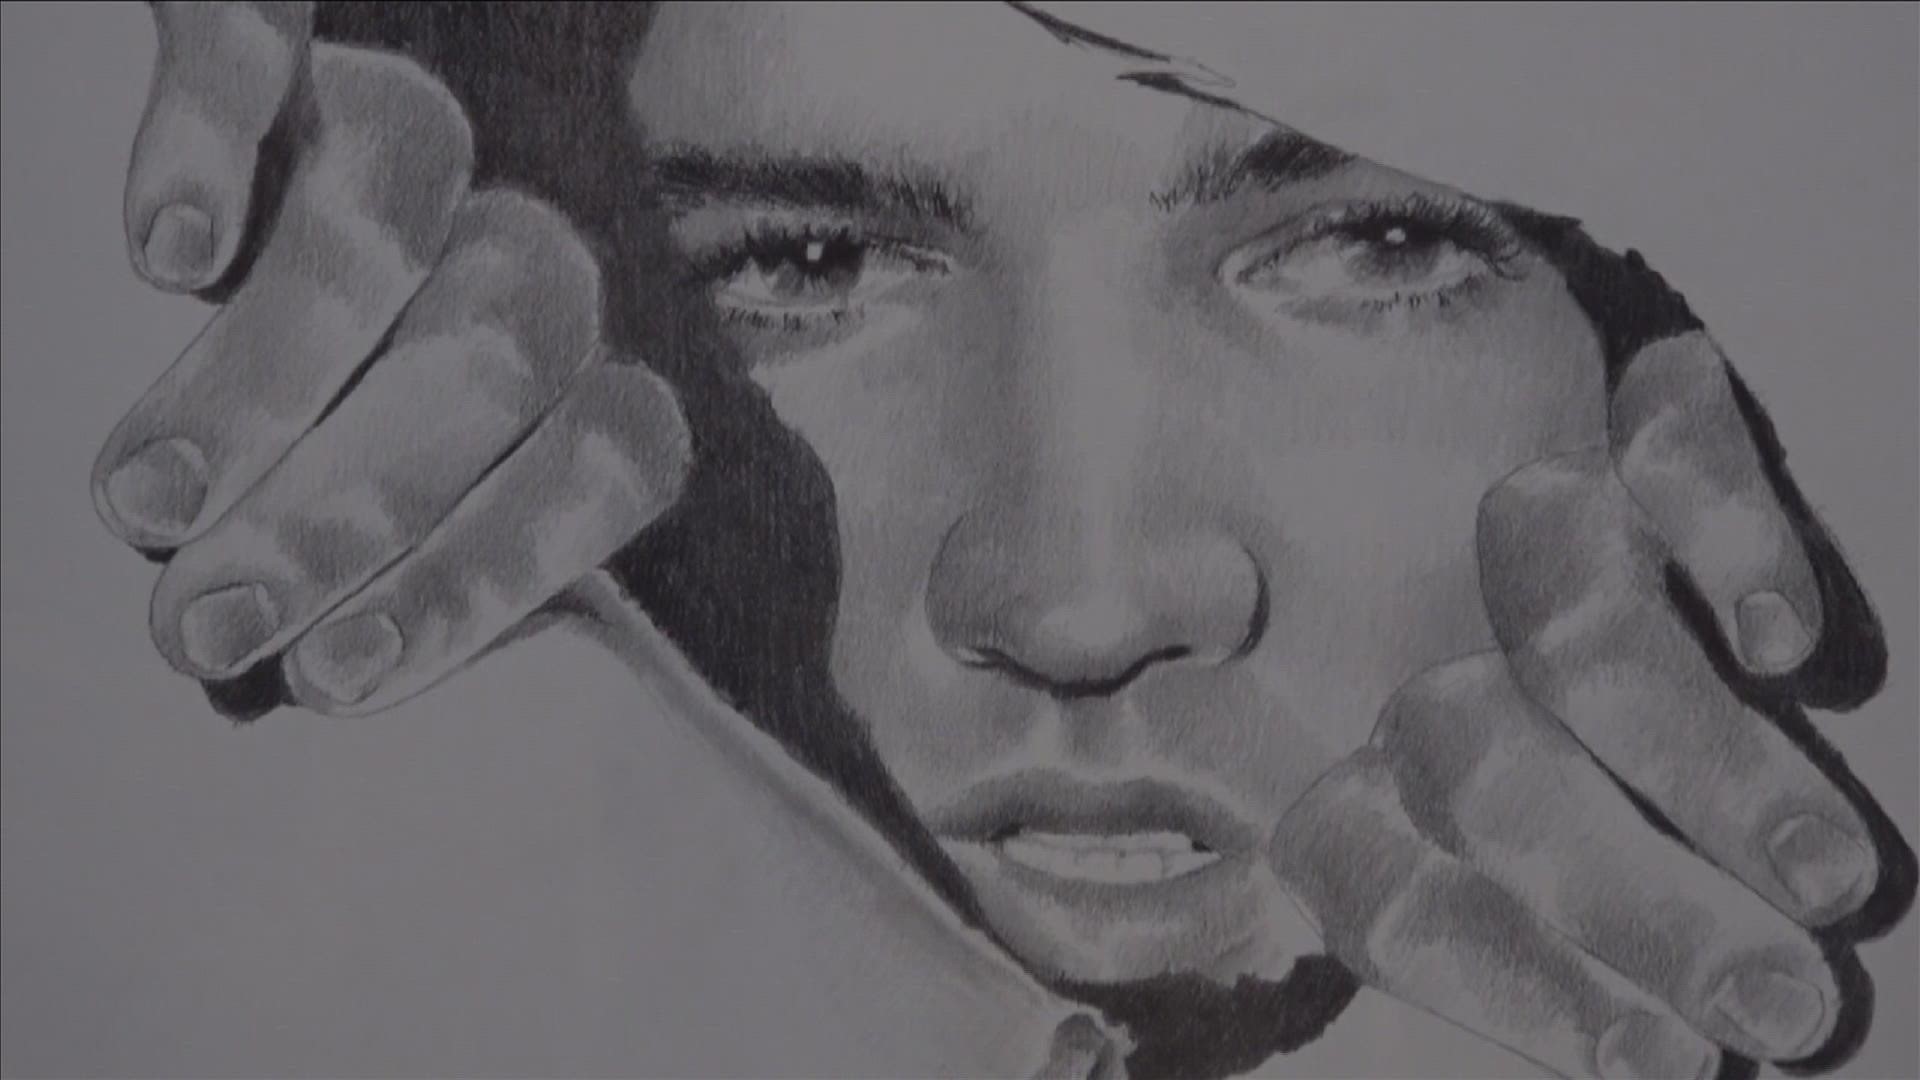 ABC24 Visual Storyteller Shiela Whaley spoke with artist Betty Harper, who says she's been drawing Elvis since before it was cool to draw the king of rock and roll.